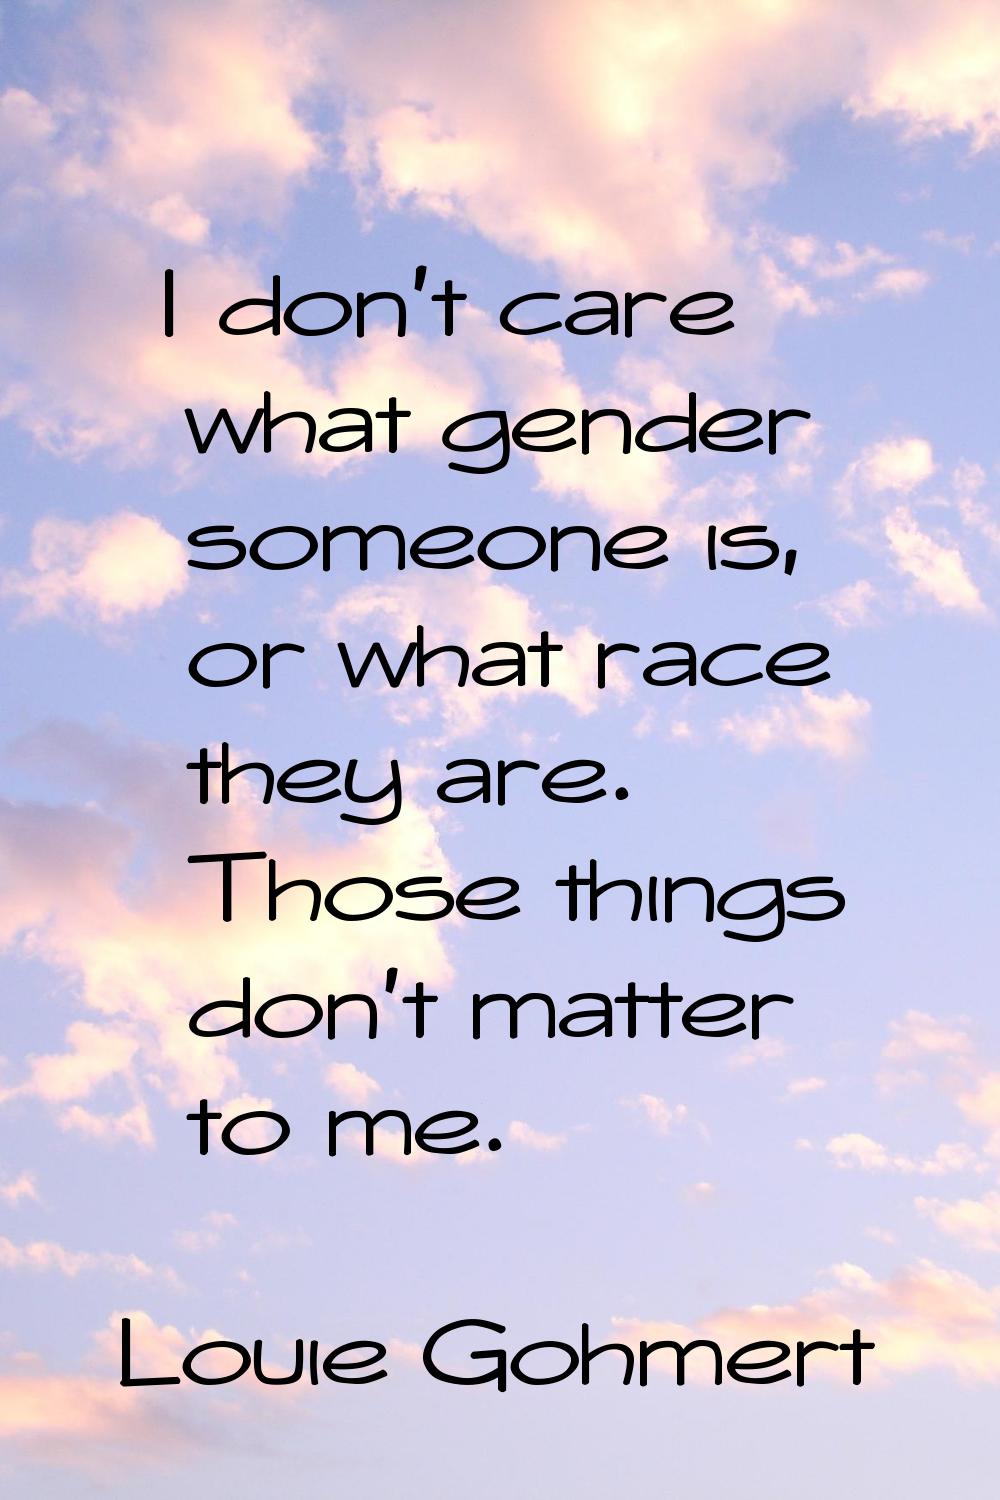 I don't care what gender someone is, or what race they are. Those things don't matter to me.